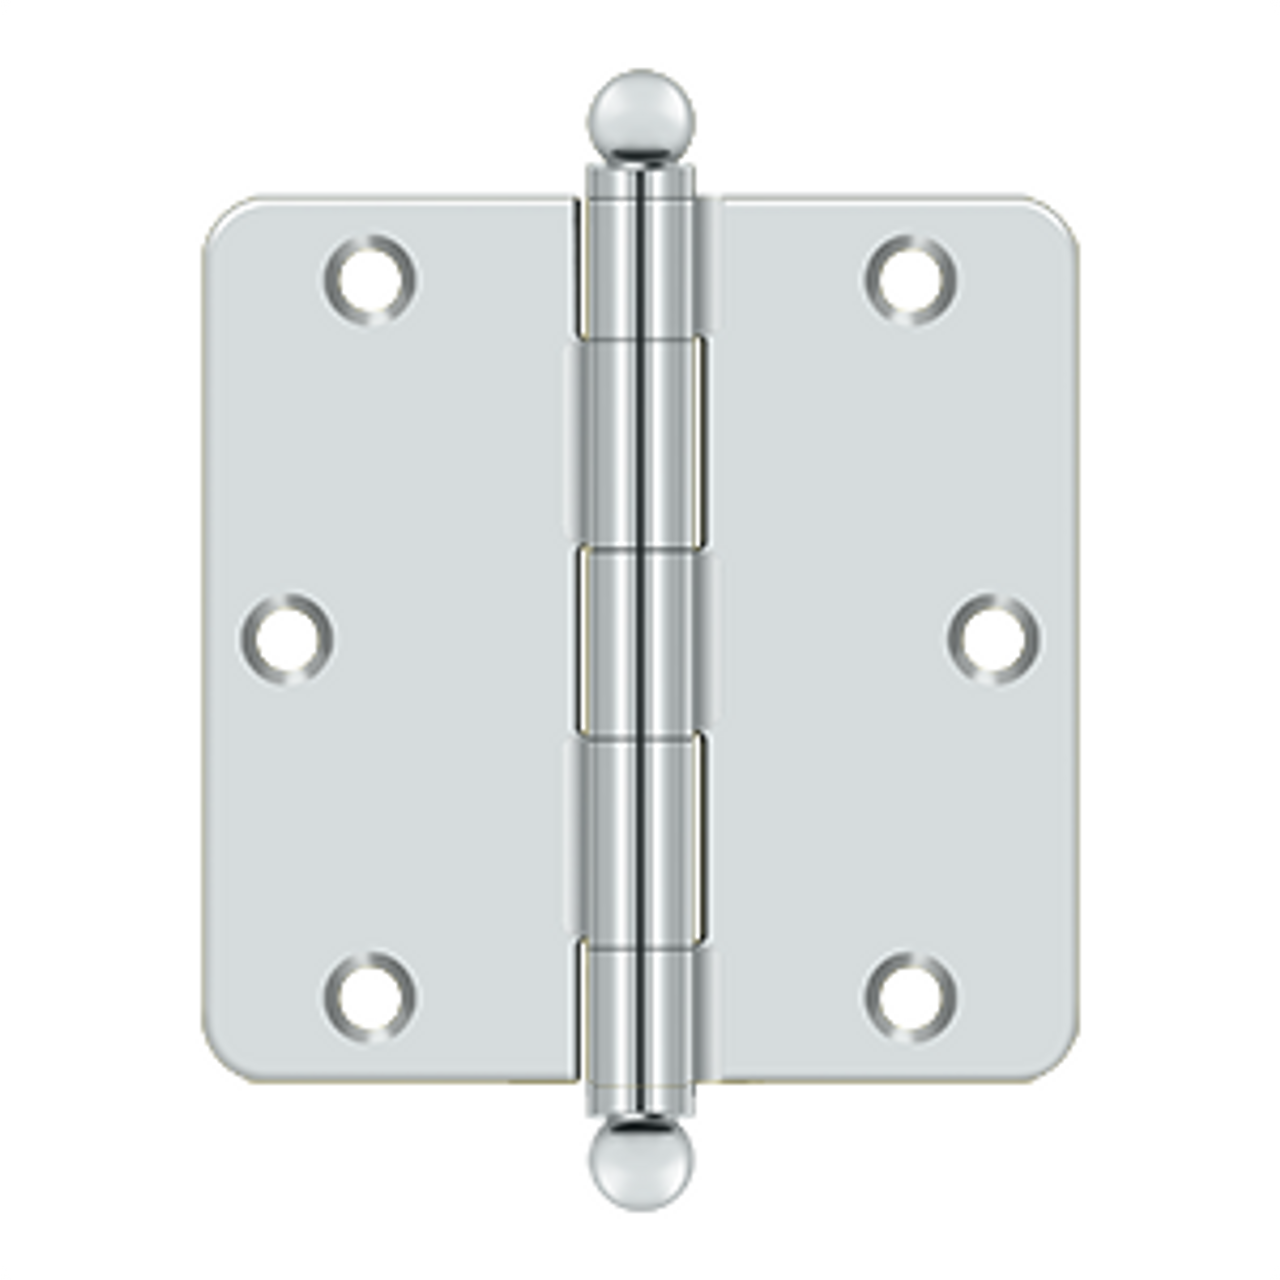 Deltana S35R4BT 3-1/2" X 3-1/2" X 1/4" RADIUS HINGE, WITH BALL TIPS,STEEL MATERIAL